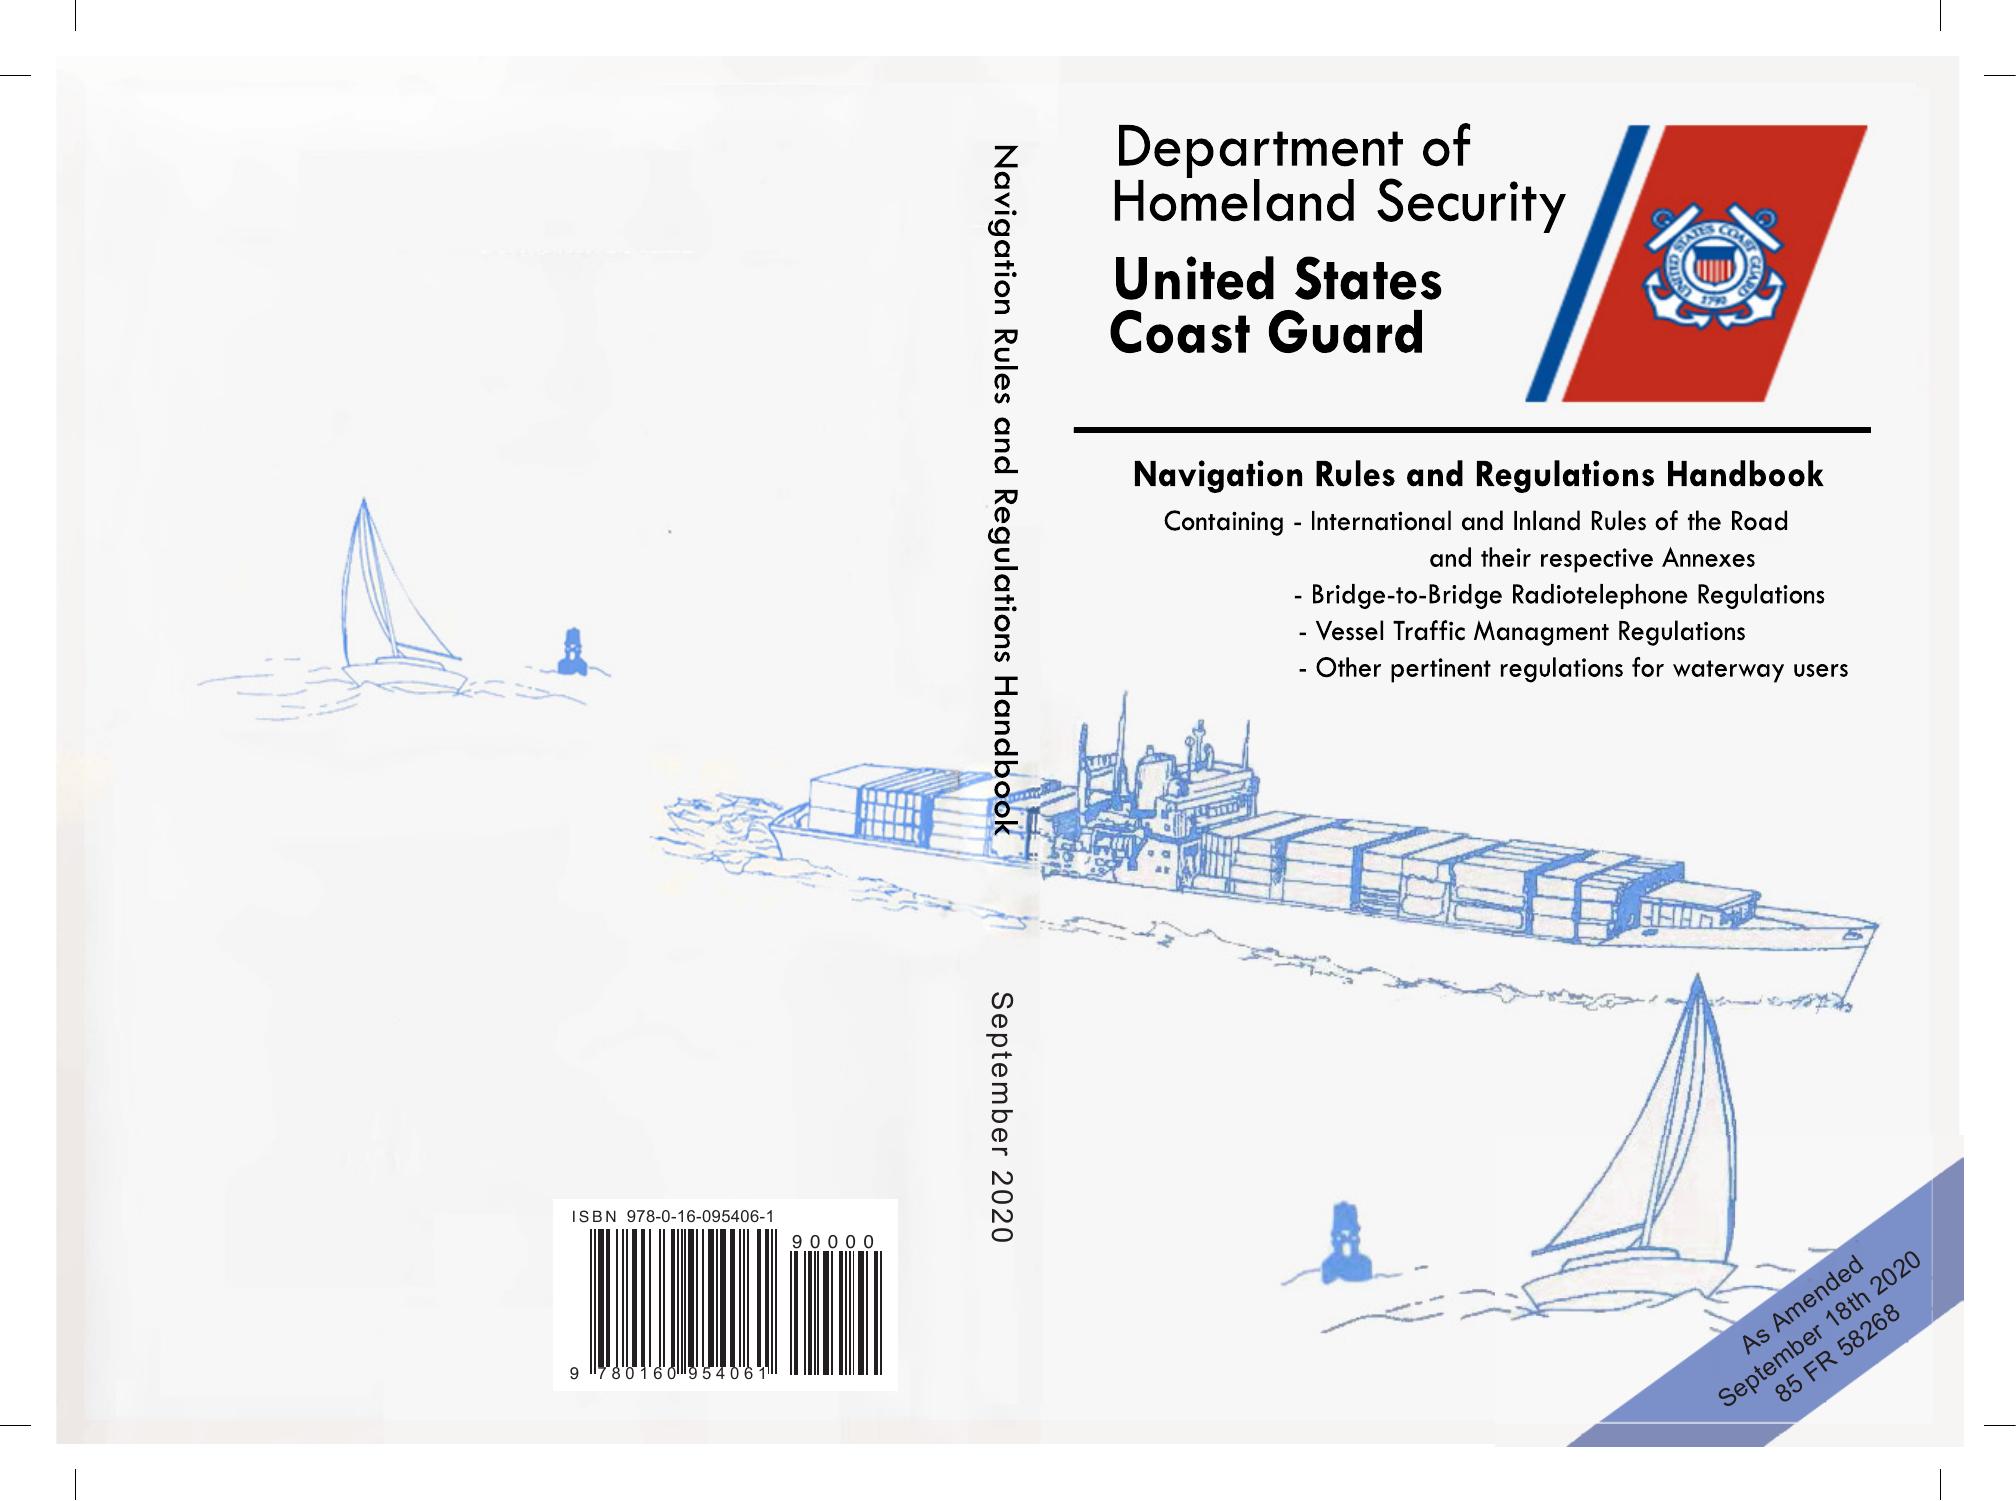 Navigation Rules And Regulations Handbook (Color Print): Containing - International & Inland Rules by USCG